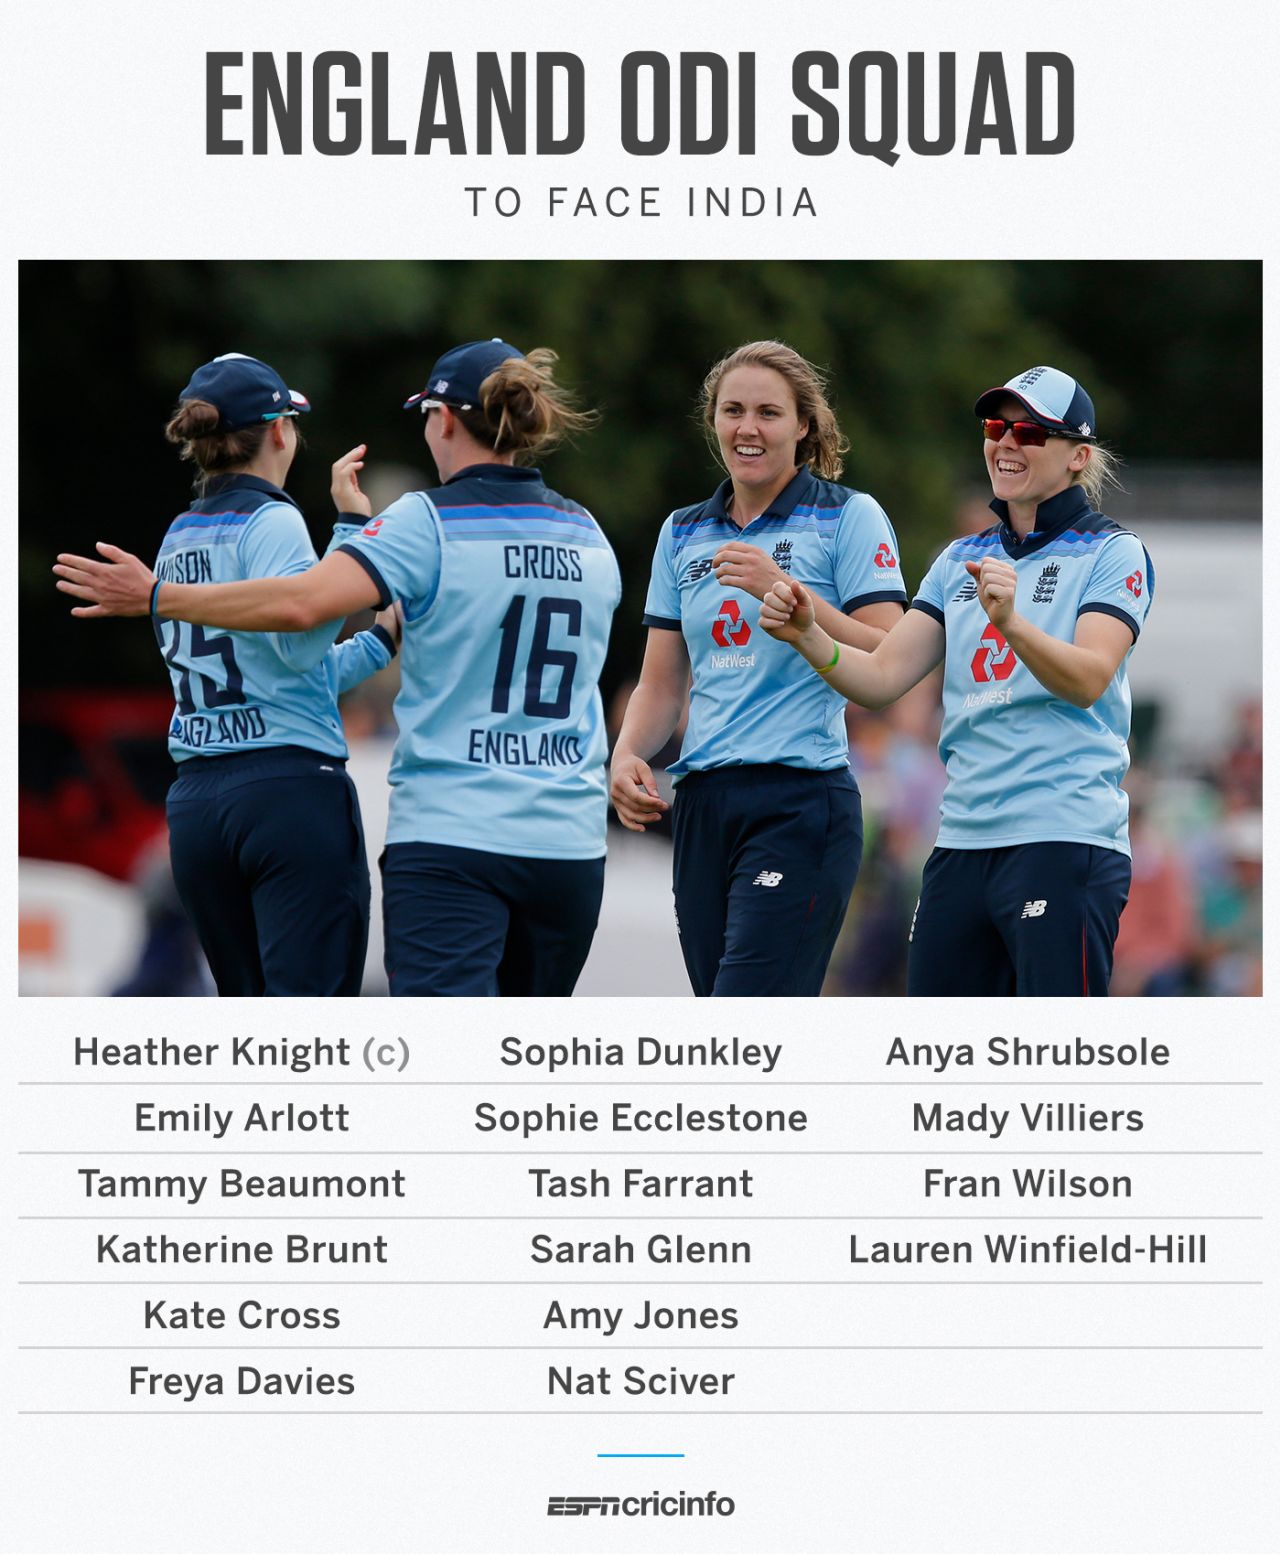 England have named their ODI squad to face India in their multi-format series